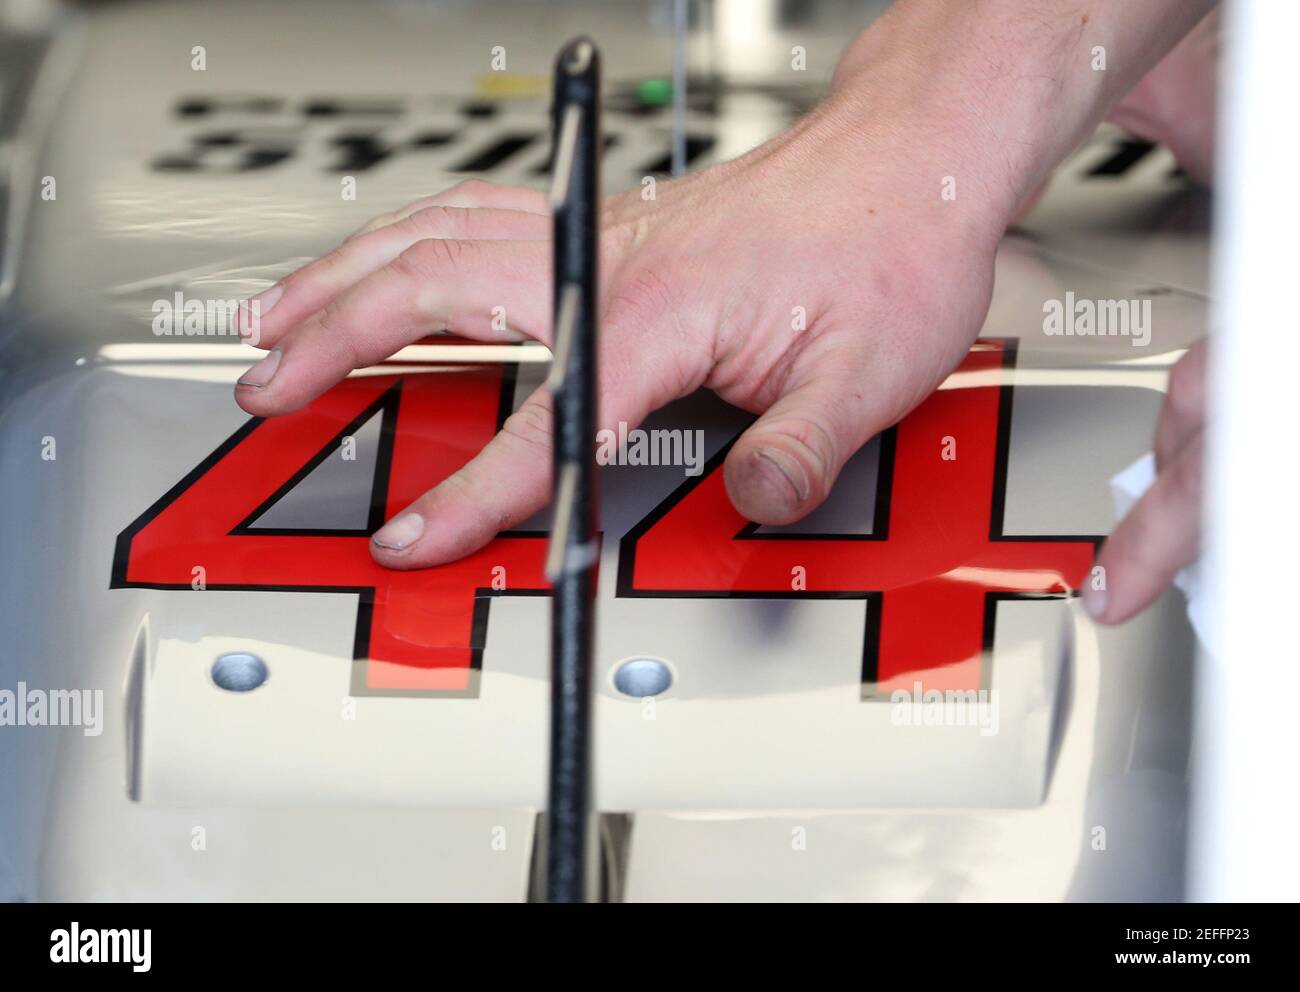 Formula One F1 - Brazilian Grand Prix - Autodromo Jose Carlos Pace, Interlagos, Sao Paulo, Brazil - November 9, 2018  Number 44 is placed on the car belonging to Mercedes' Lewis Hamilton during practice  REUTERS/Paulo Whitaker Stock Photo